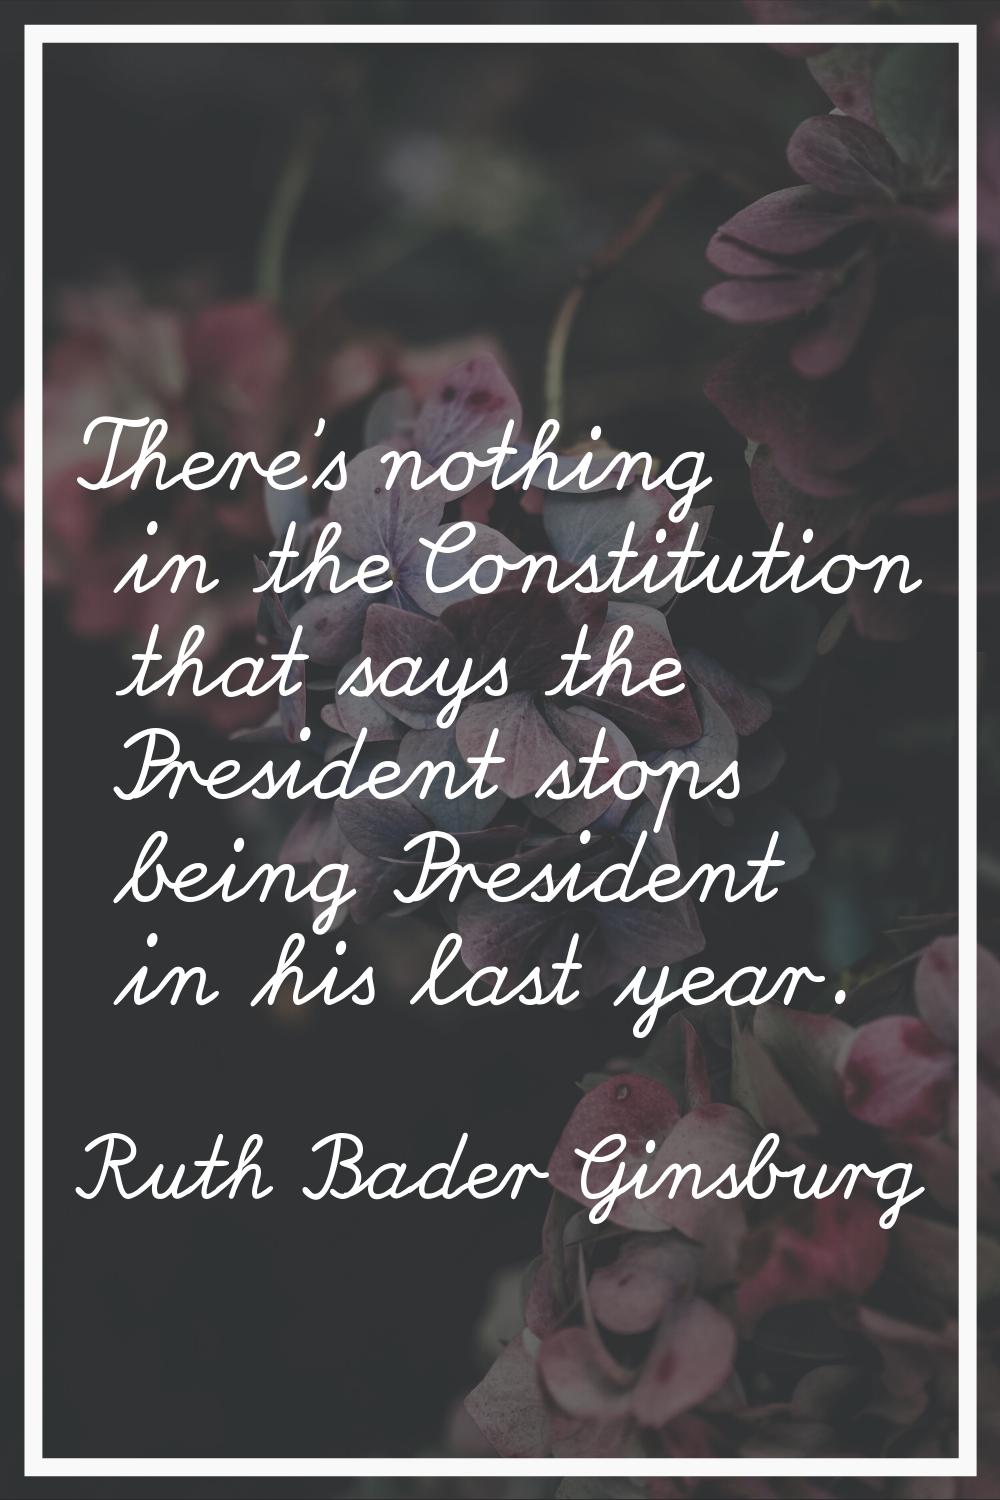 There's nothing in the Constitution that says the President stops being President in his last year.